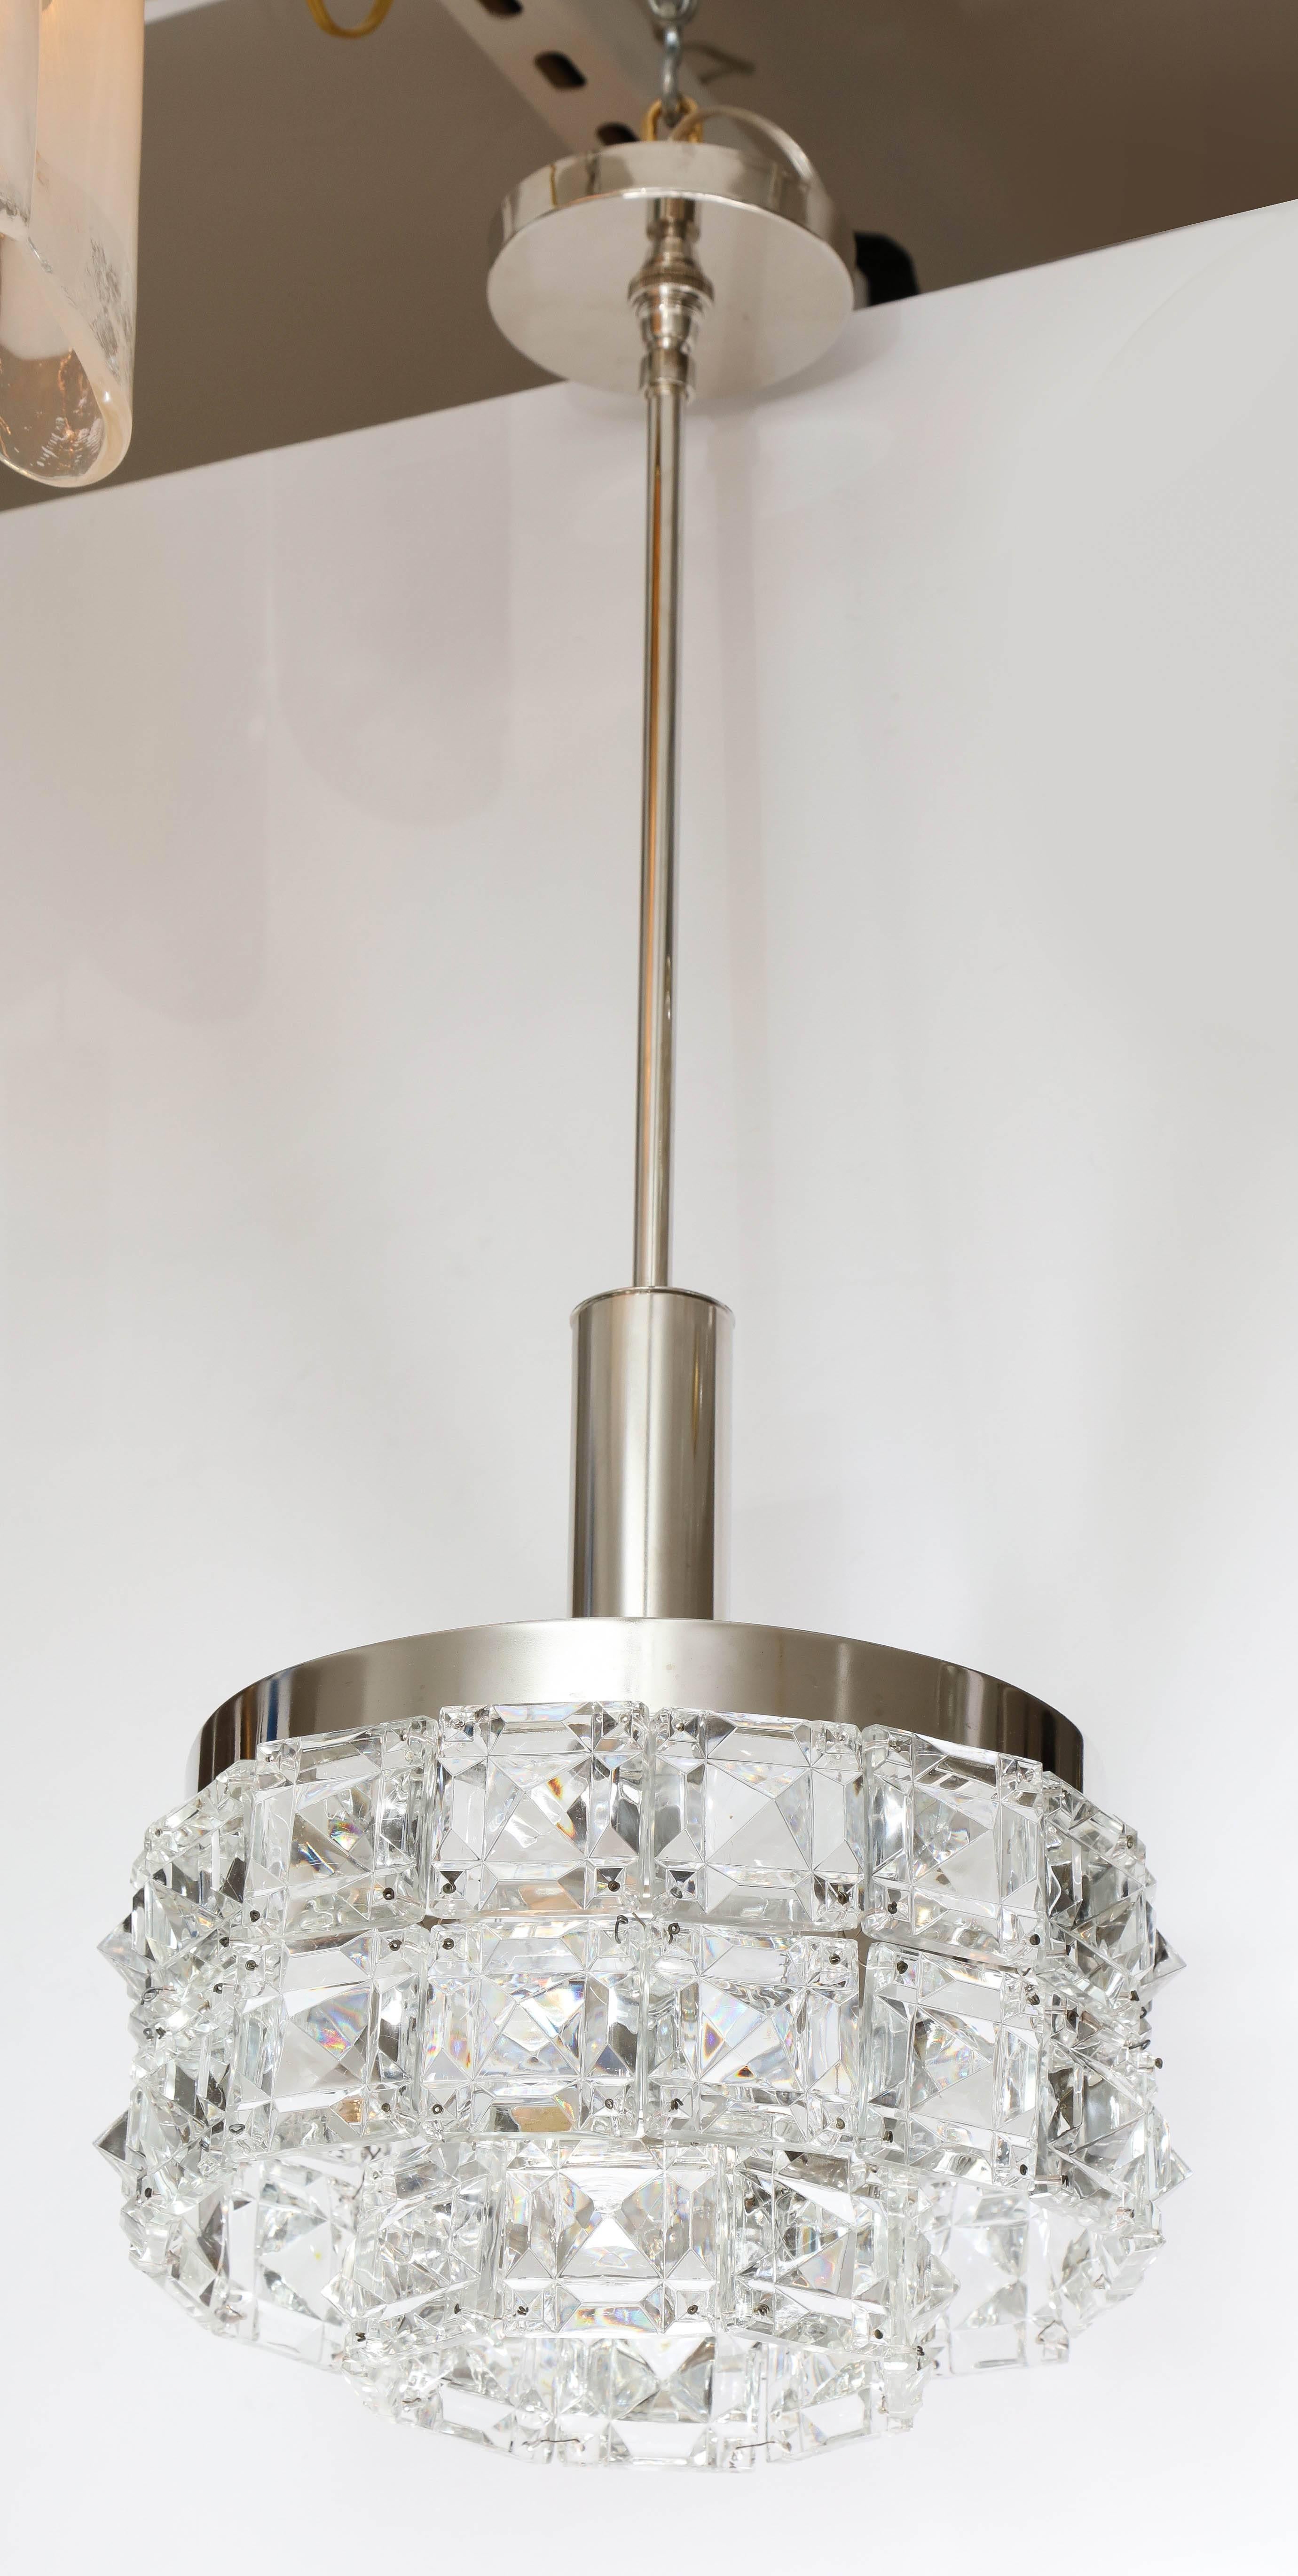 Early Kinkeldey chandelier with deep cut square crystals on a polished nickel stem and canopy. Rewired for use in the USA. Uses one standard bulb. Chandelier body is 7.5 inches tall.